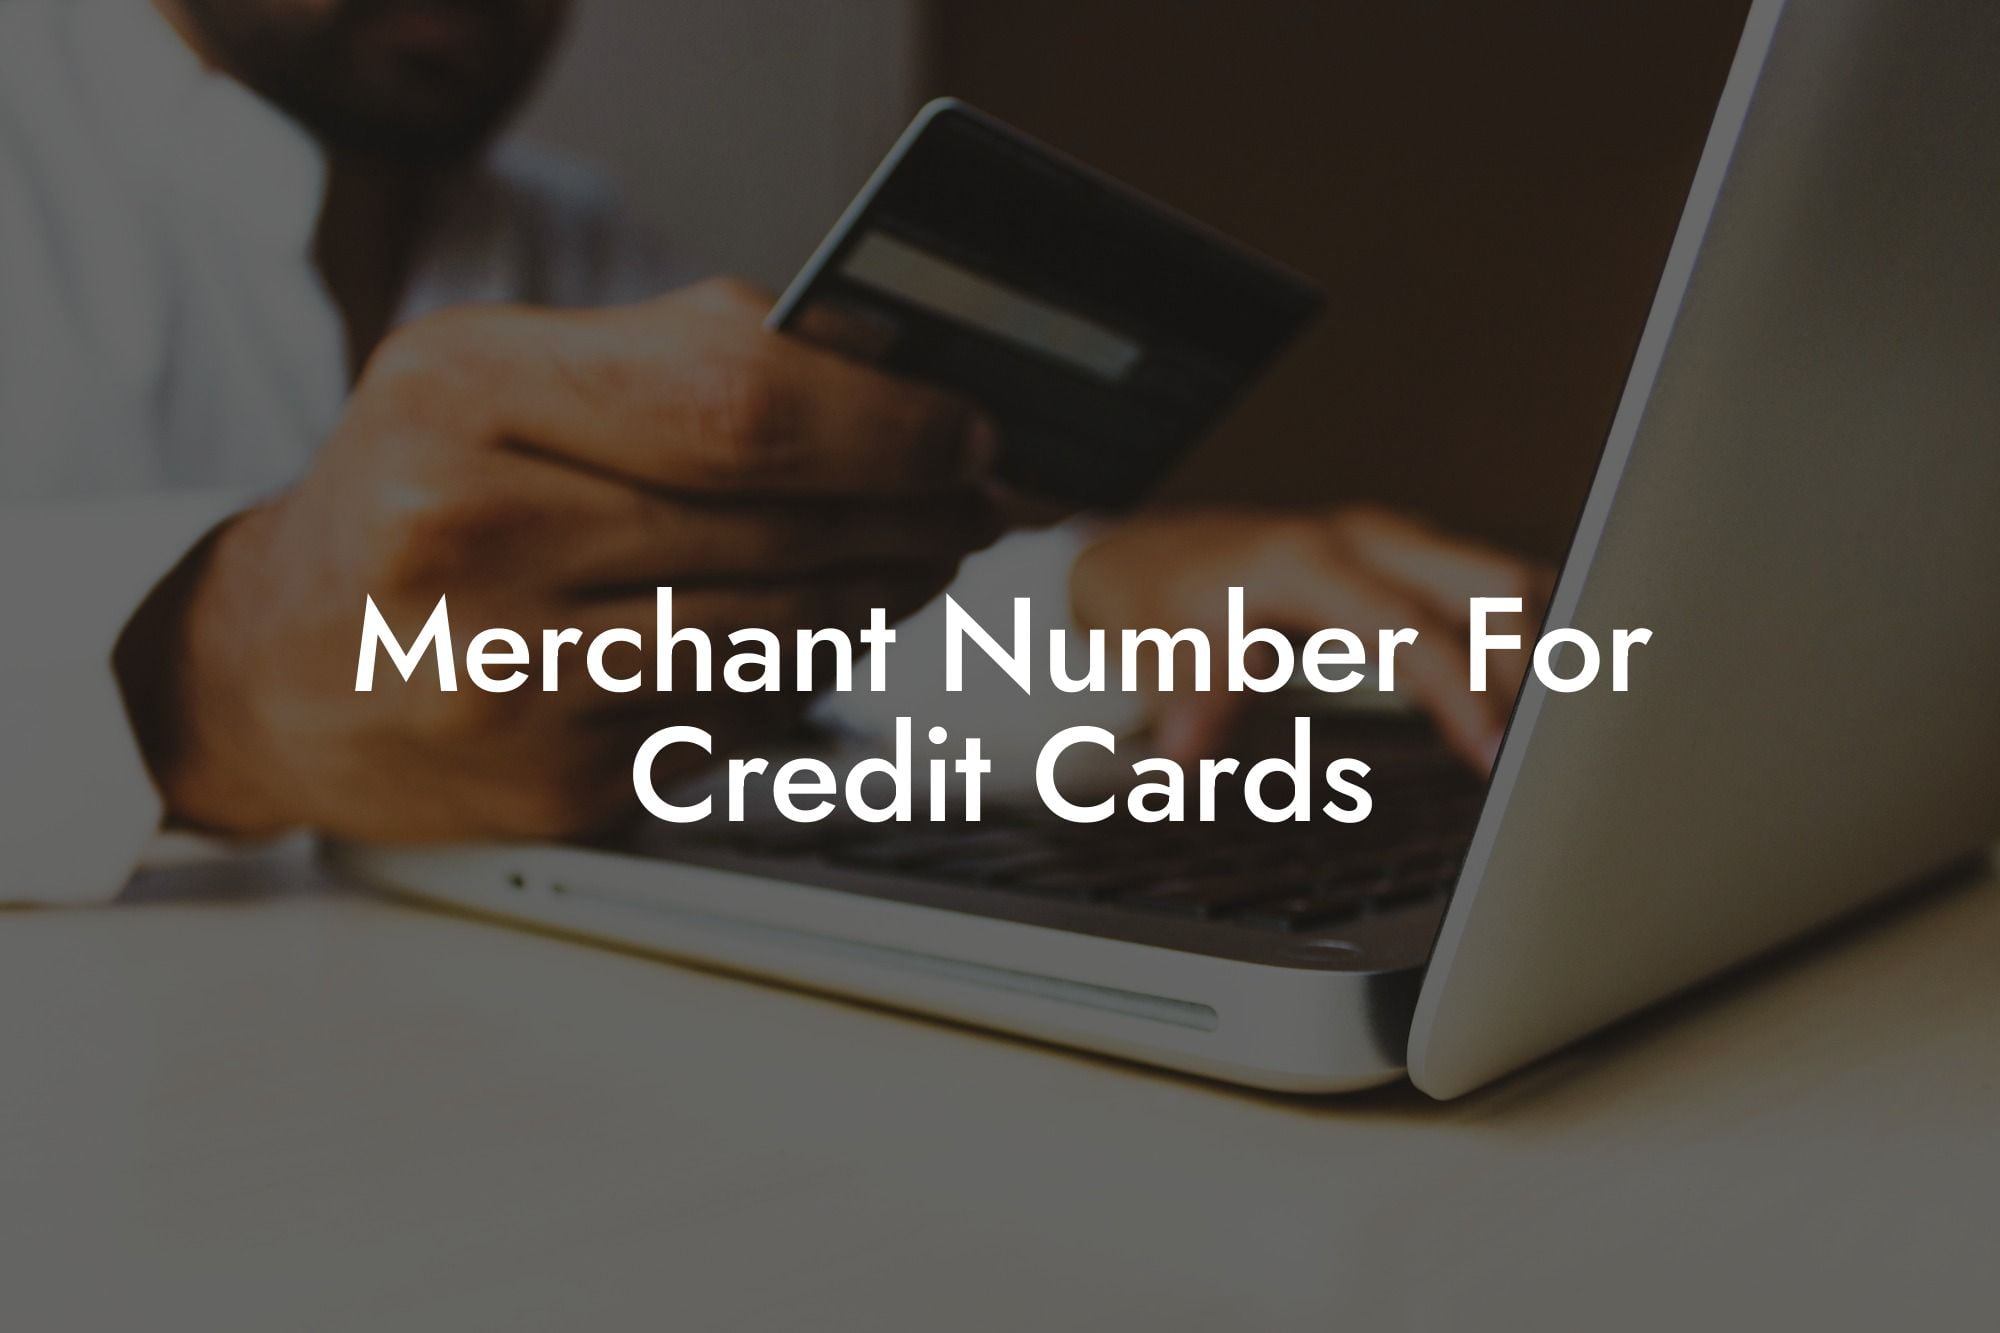 Merchant Number For Credit Cards